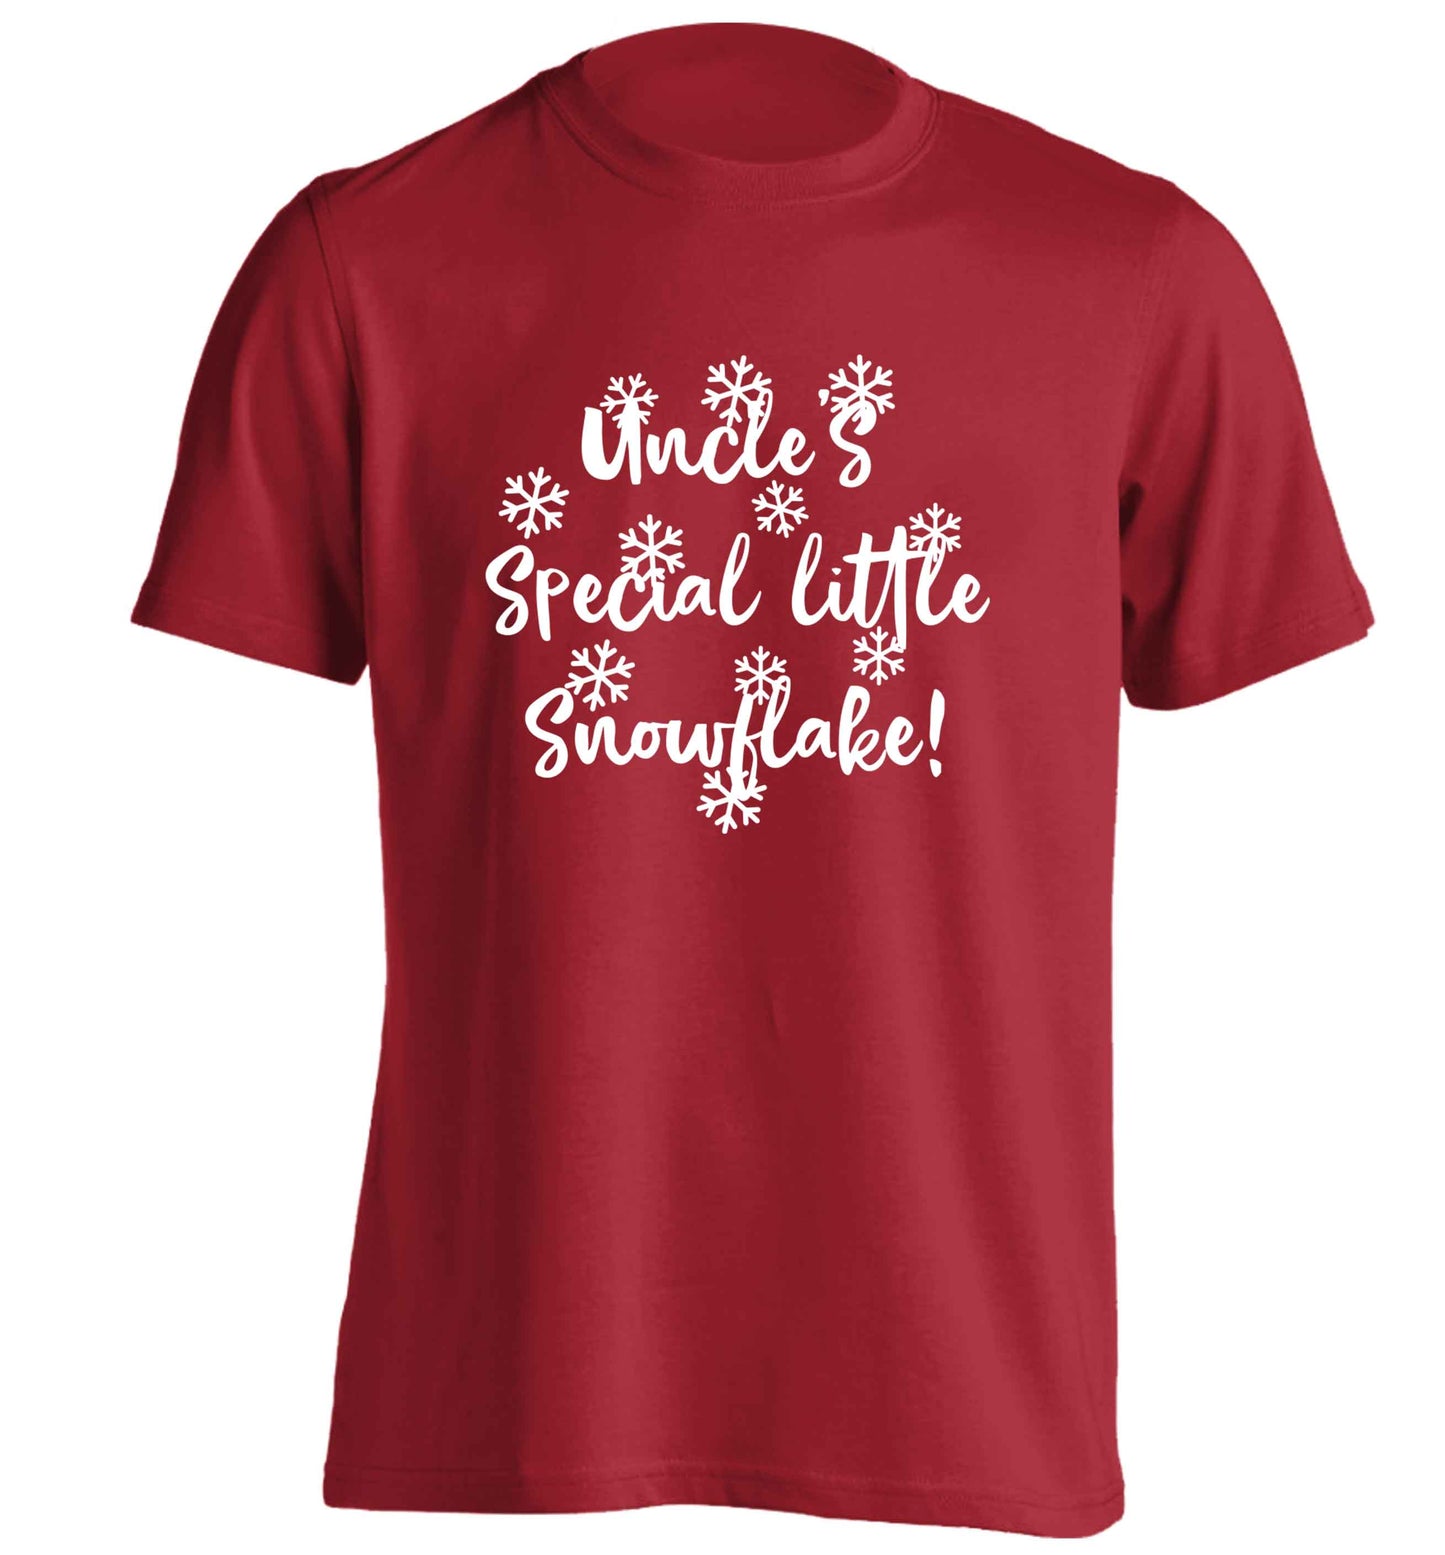 Uncle's special little snowflake adults unisex red Tshirt 2XL